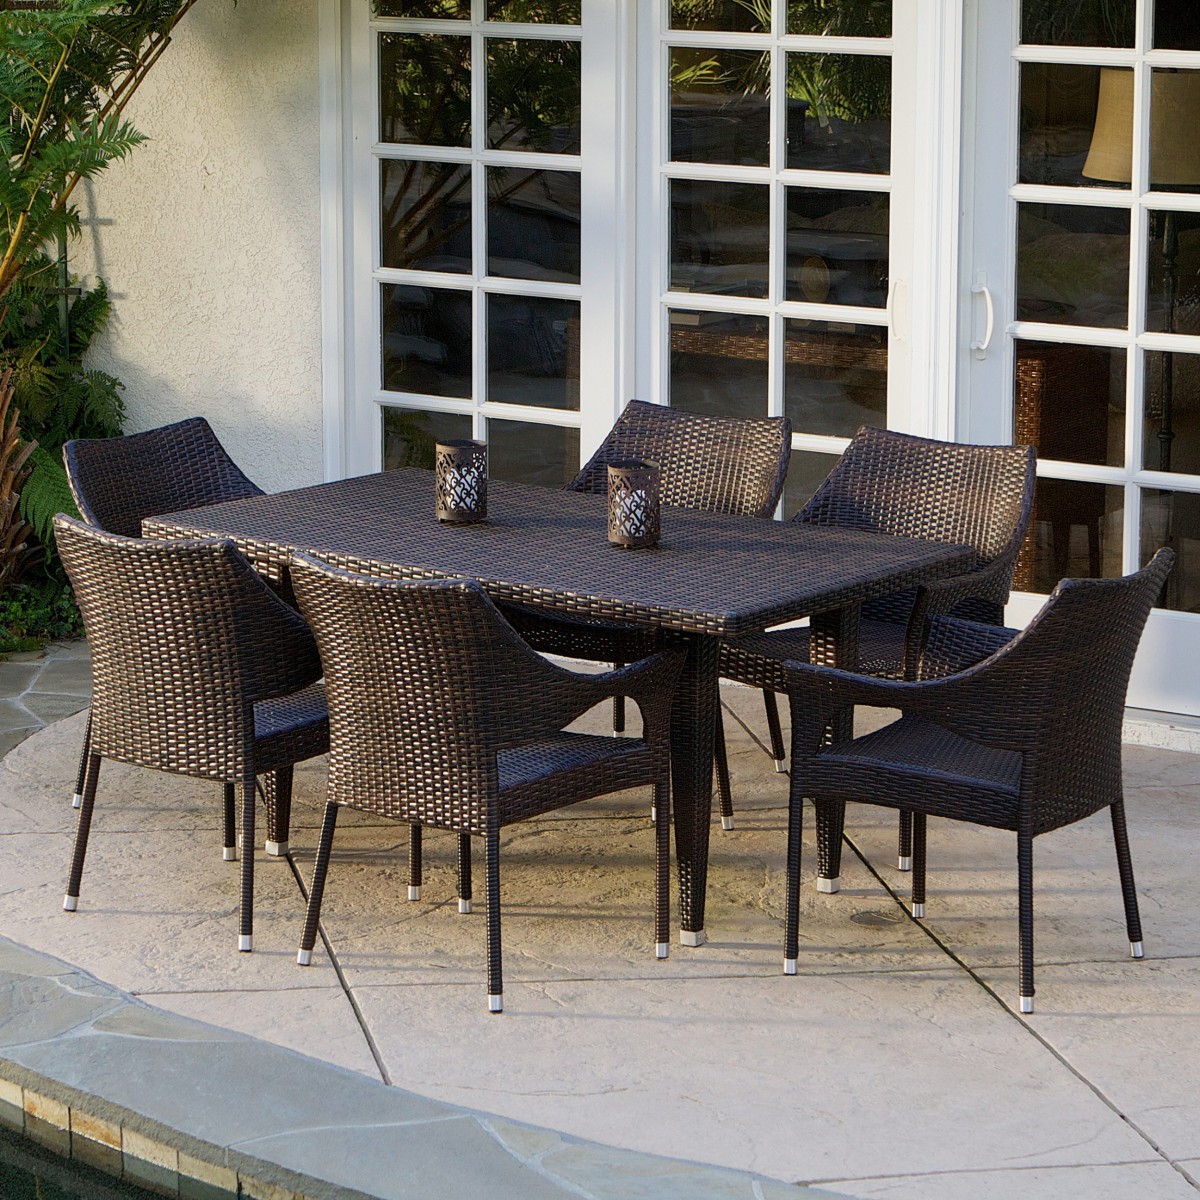 Del Mar Wicker 7 Piece Outdoor Dining Set with Stackable Wicker Chairs